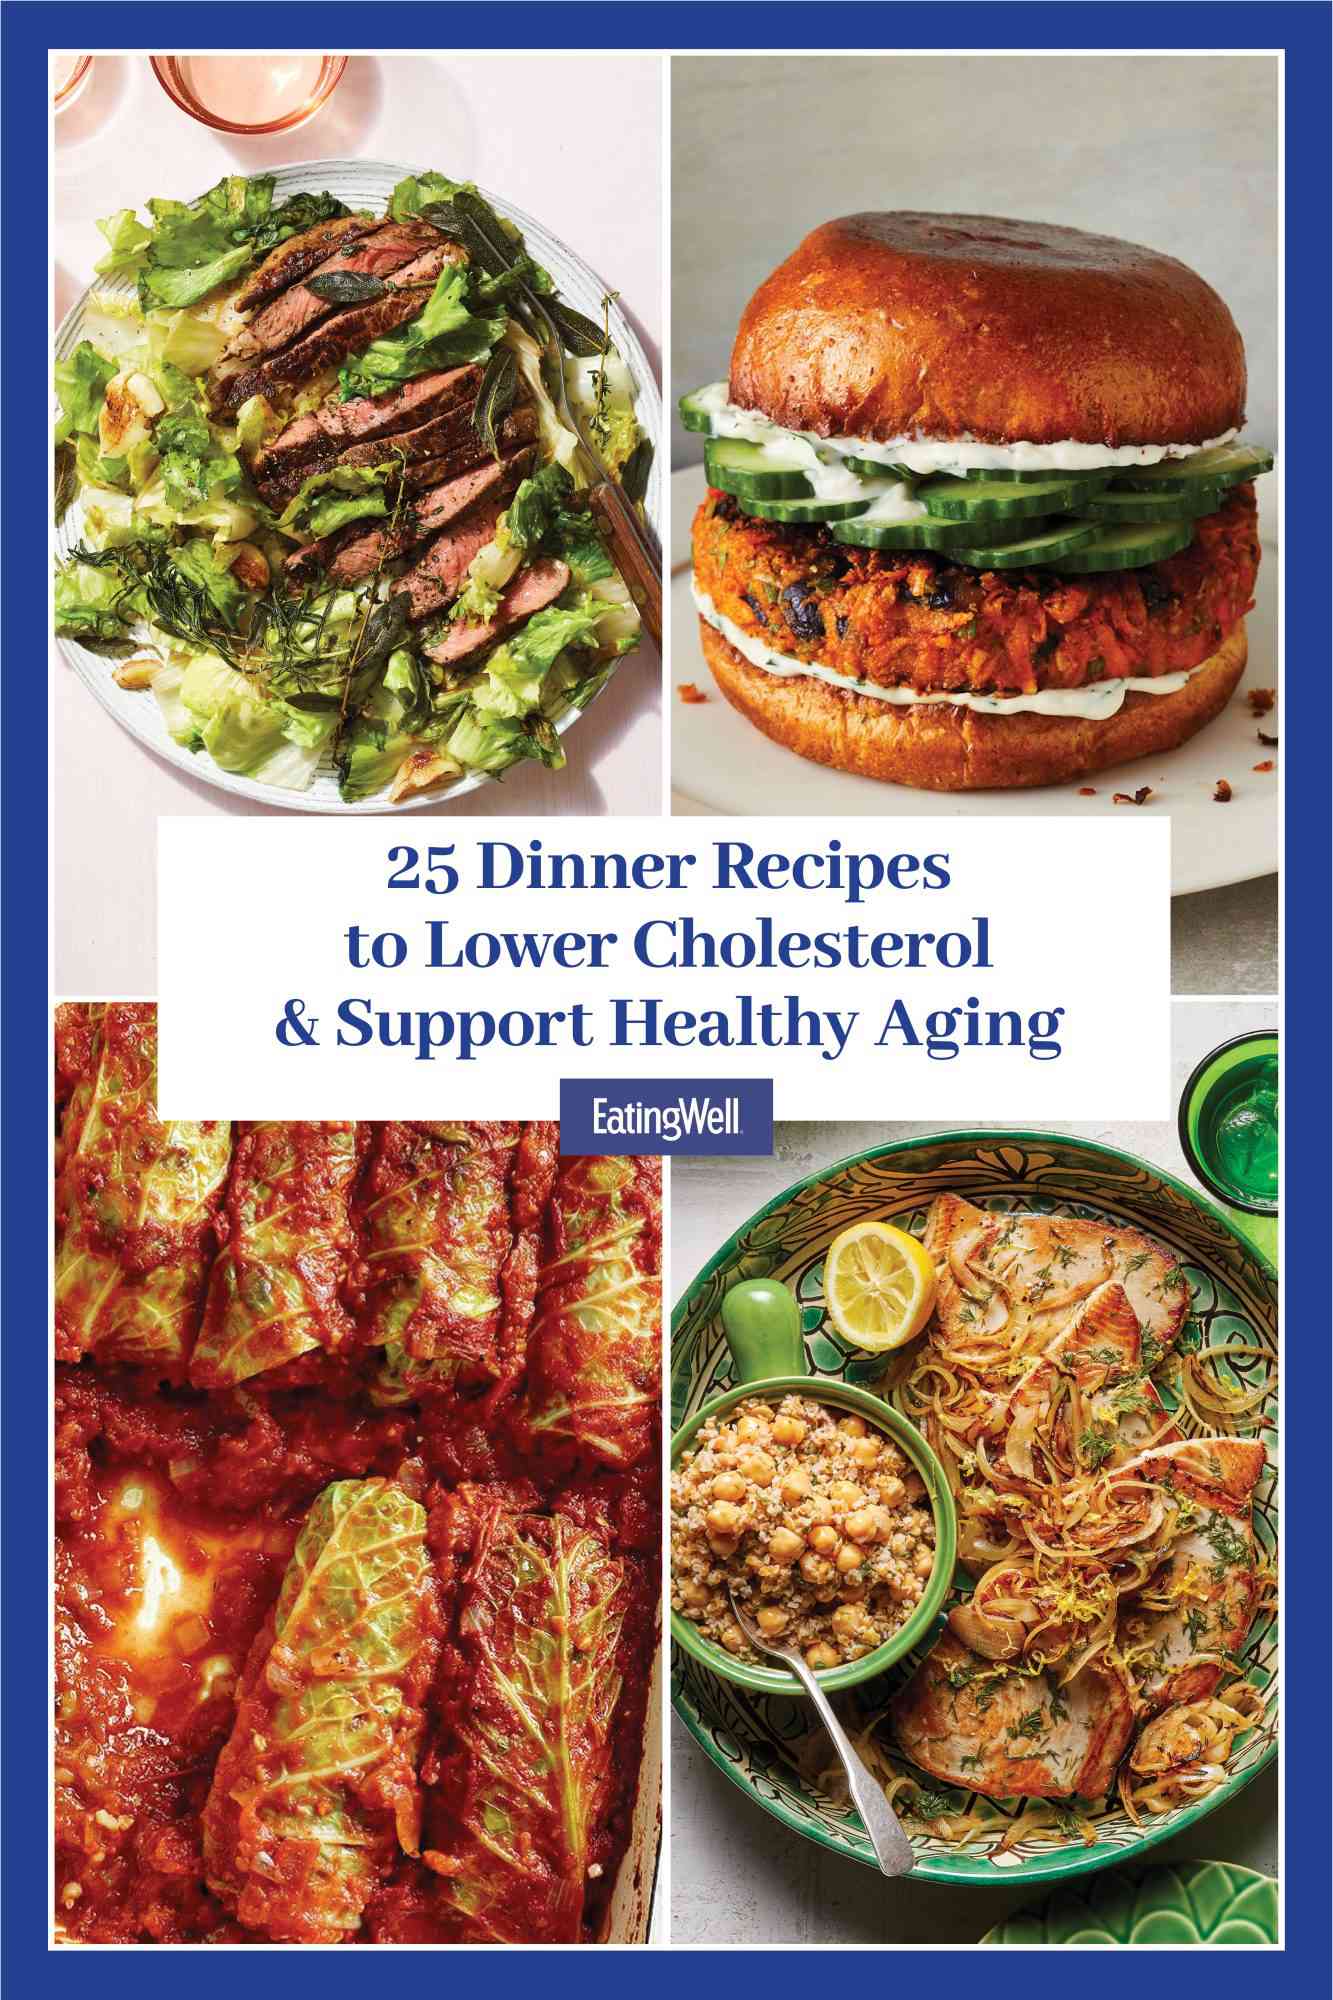 a collage of the 25 Dinner Recipes to Lower Cholesterol and Support Healthy Aging